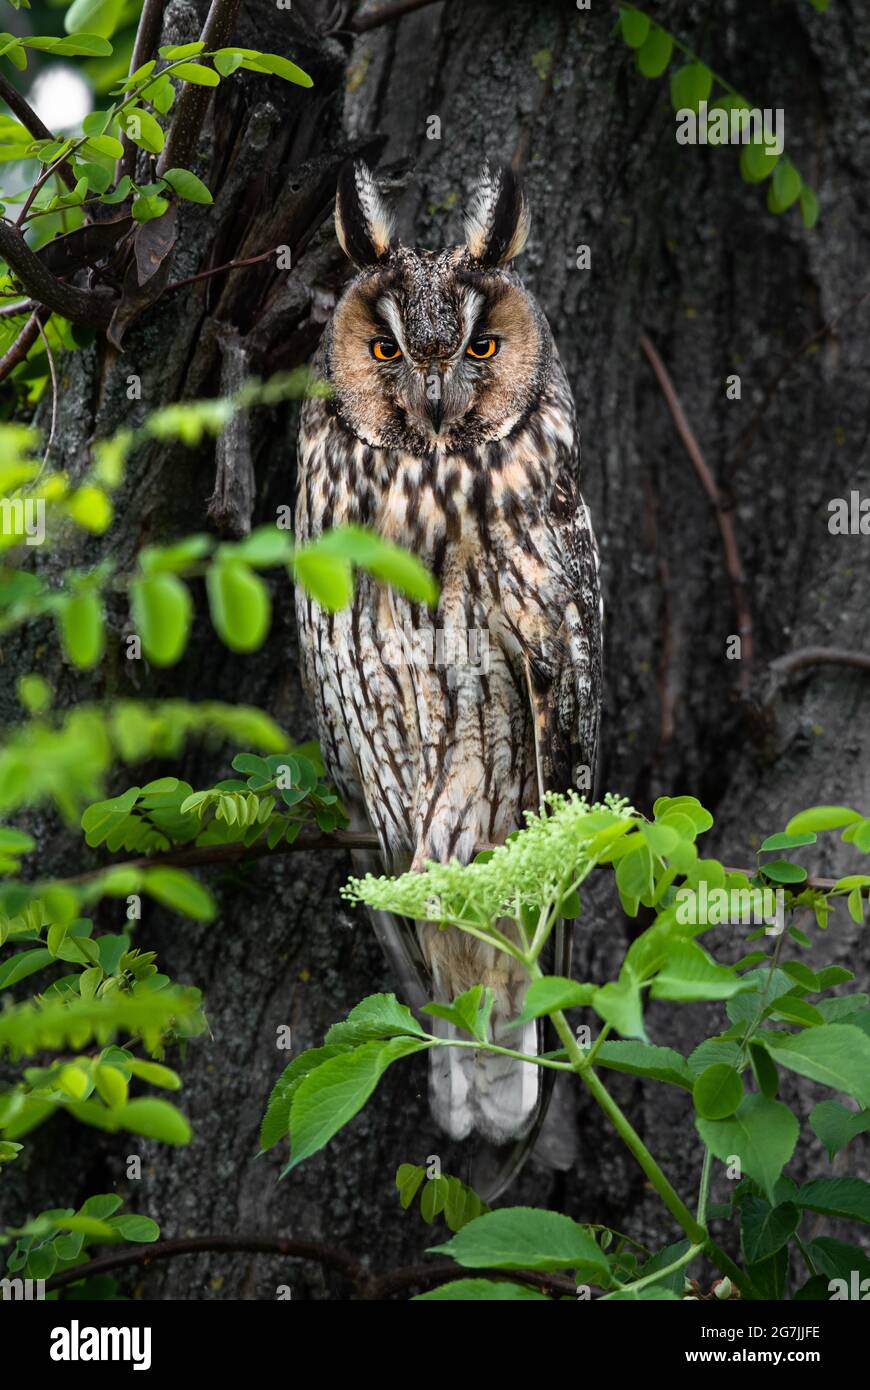 Majestic owl, wise Long-eared owl portrait, predator sitting on tree branch, calm Asio Otus staring with big bright eyes wide open Stock Photo